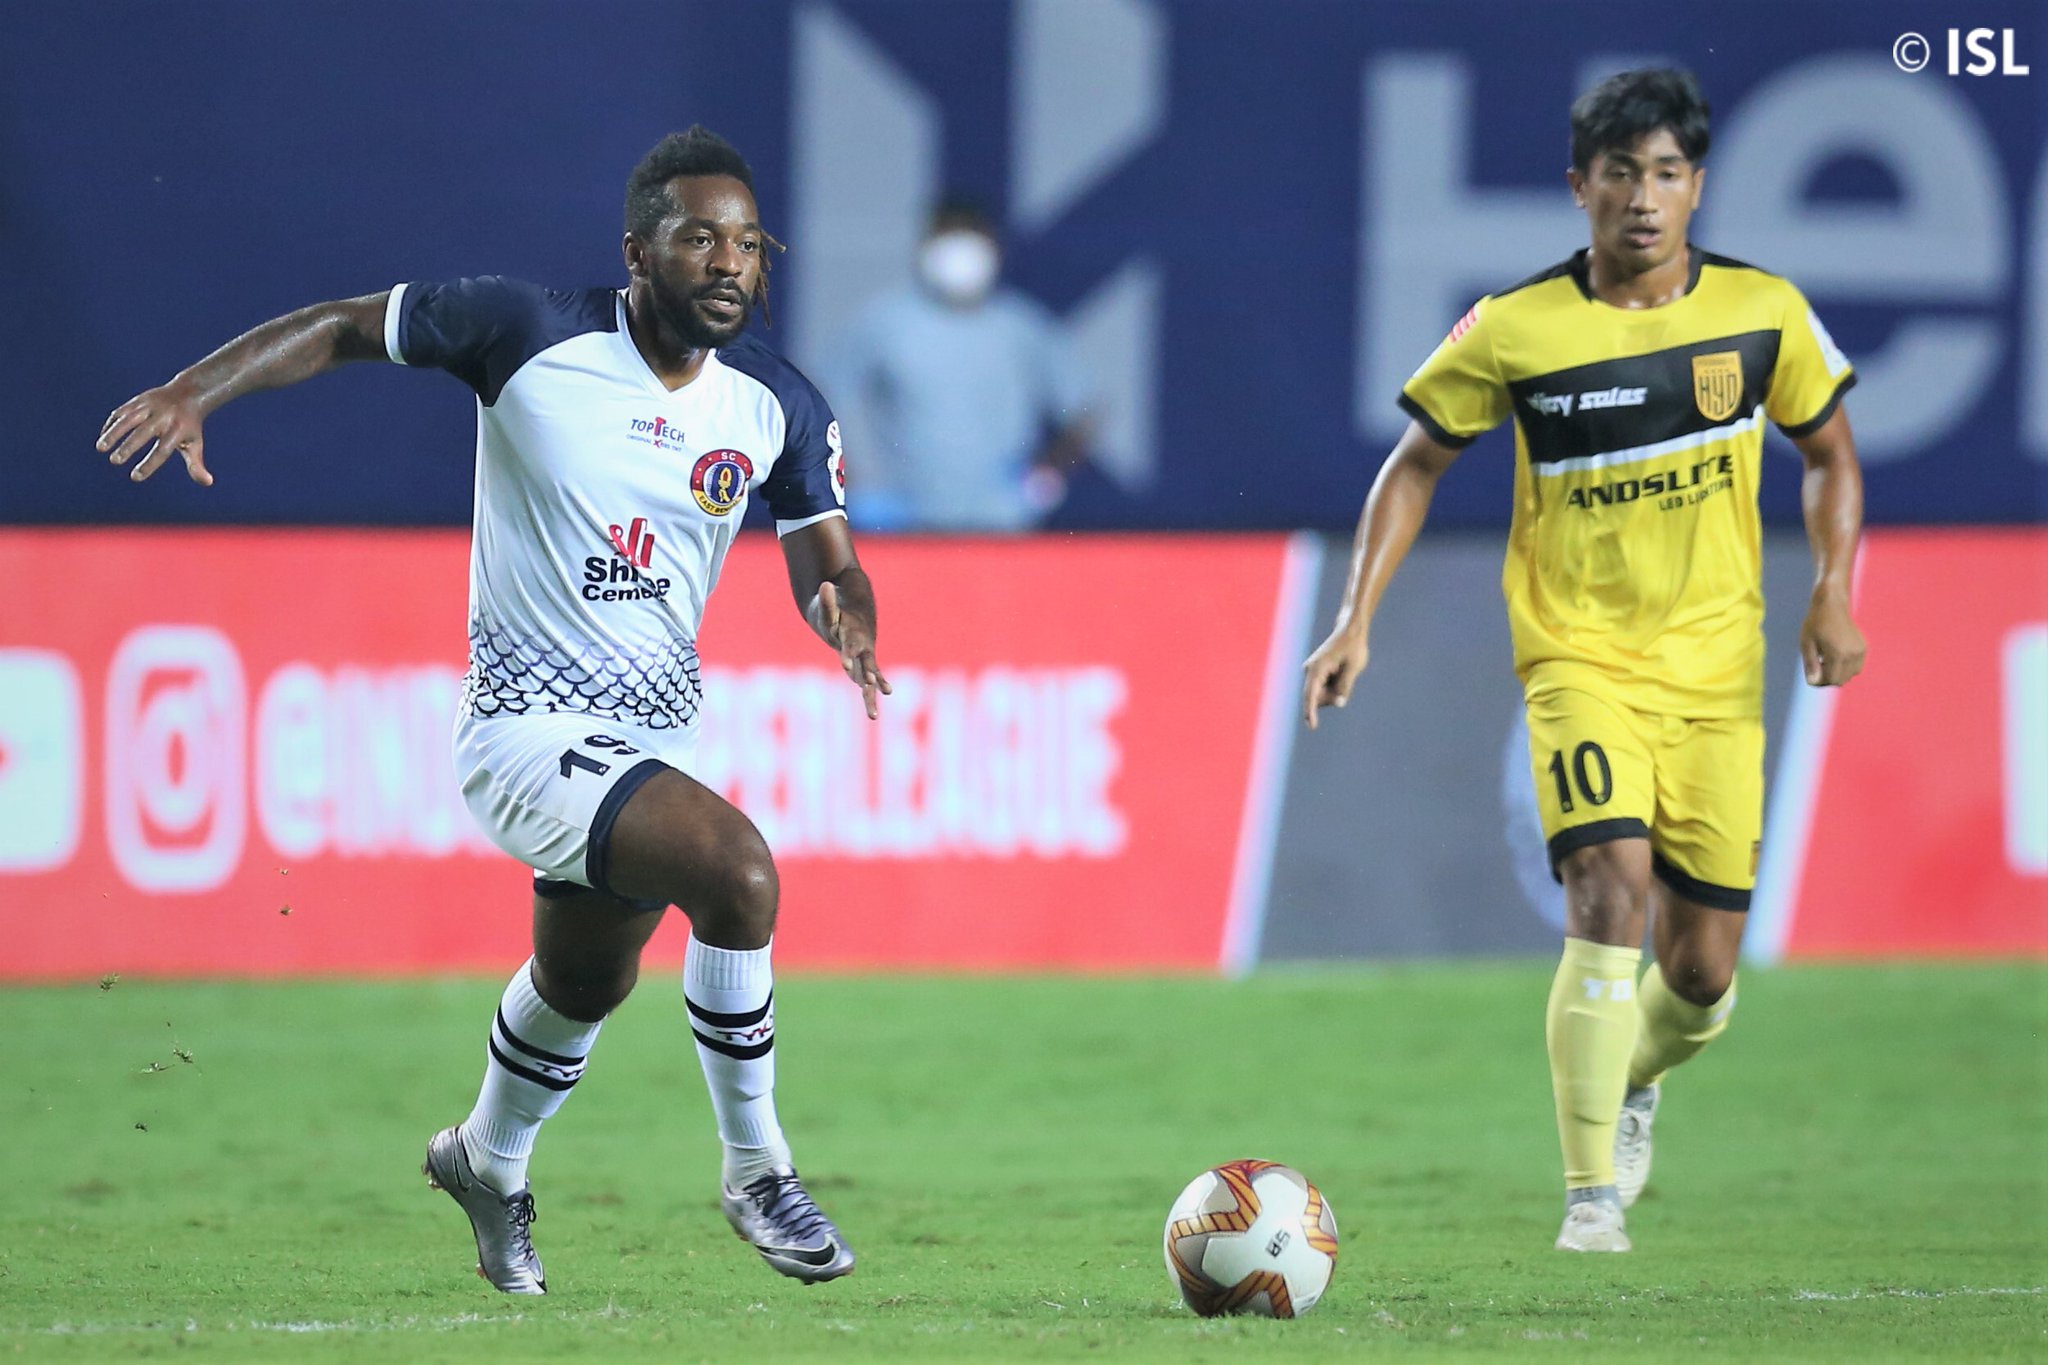 ISL: Jacques Maghoma’s brace in vain as Hyderabad FC rally to beat SC East Bengal 3-2